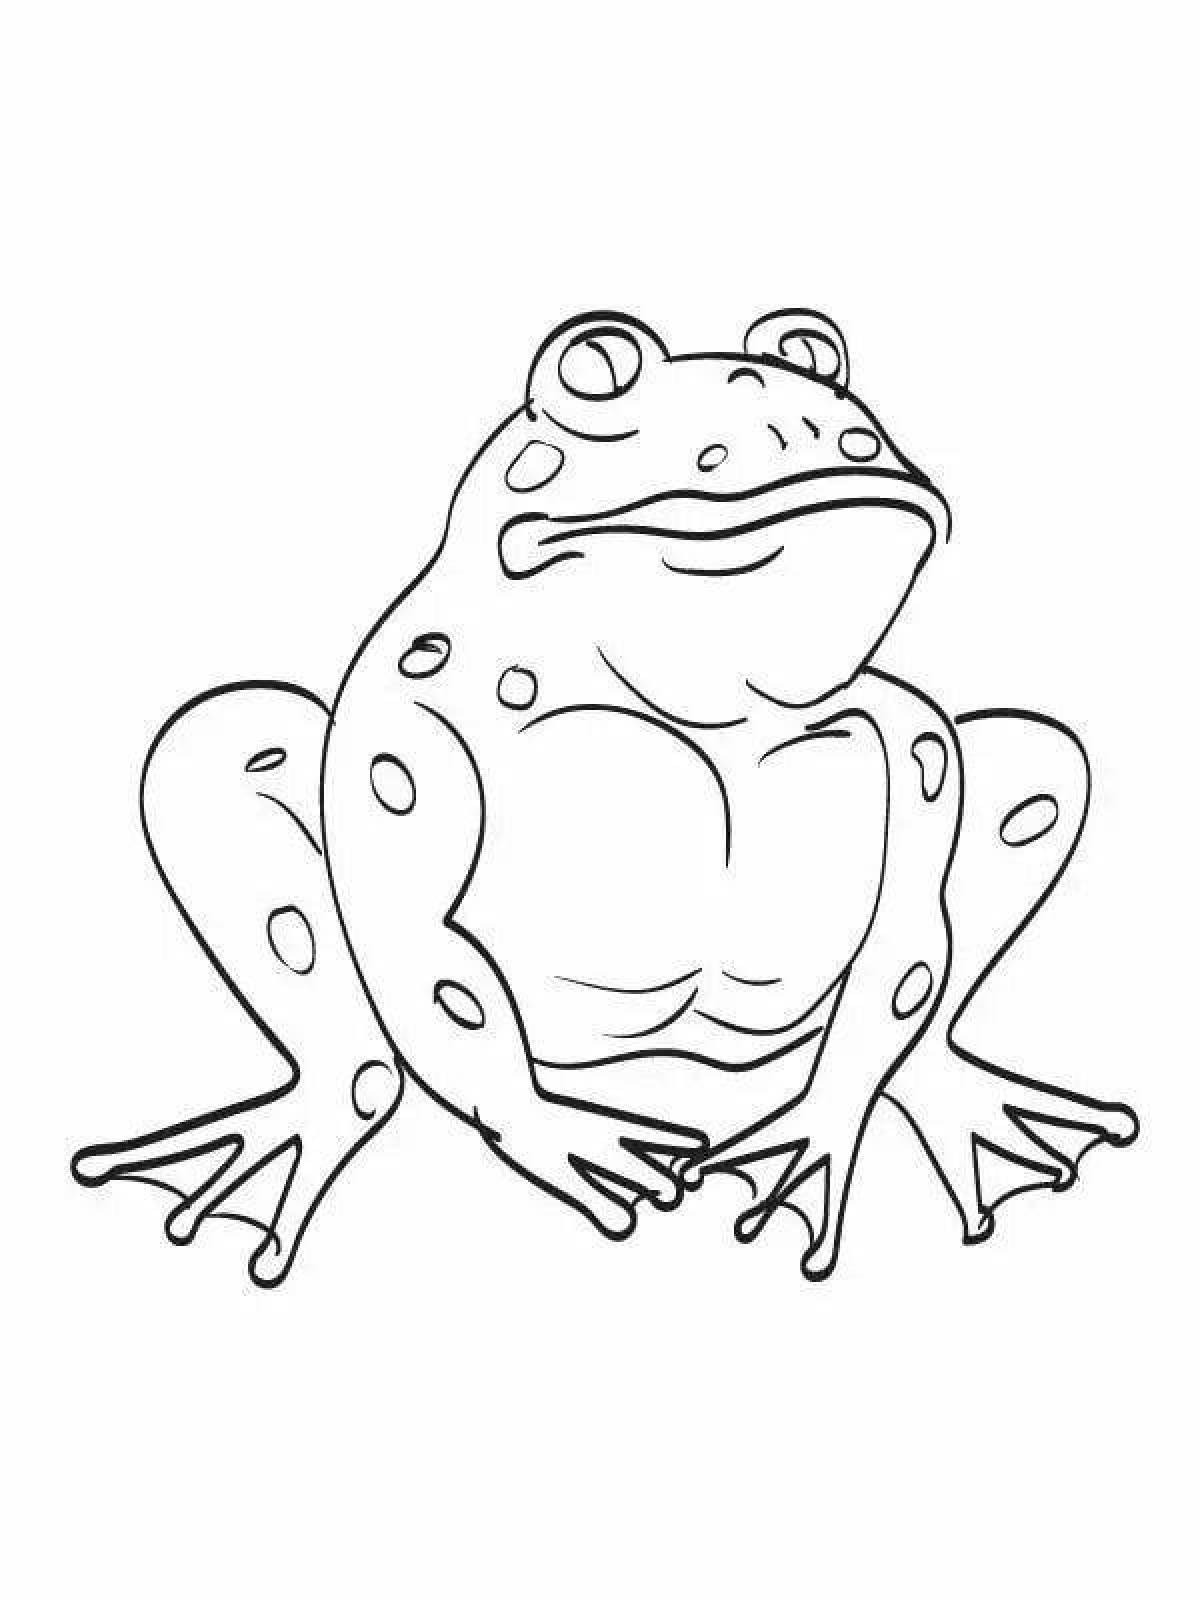 Amazing toad and rose coloring page